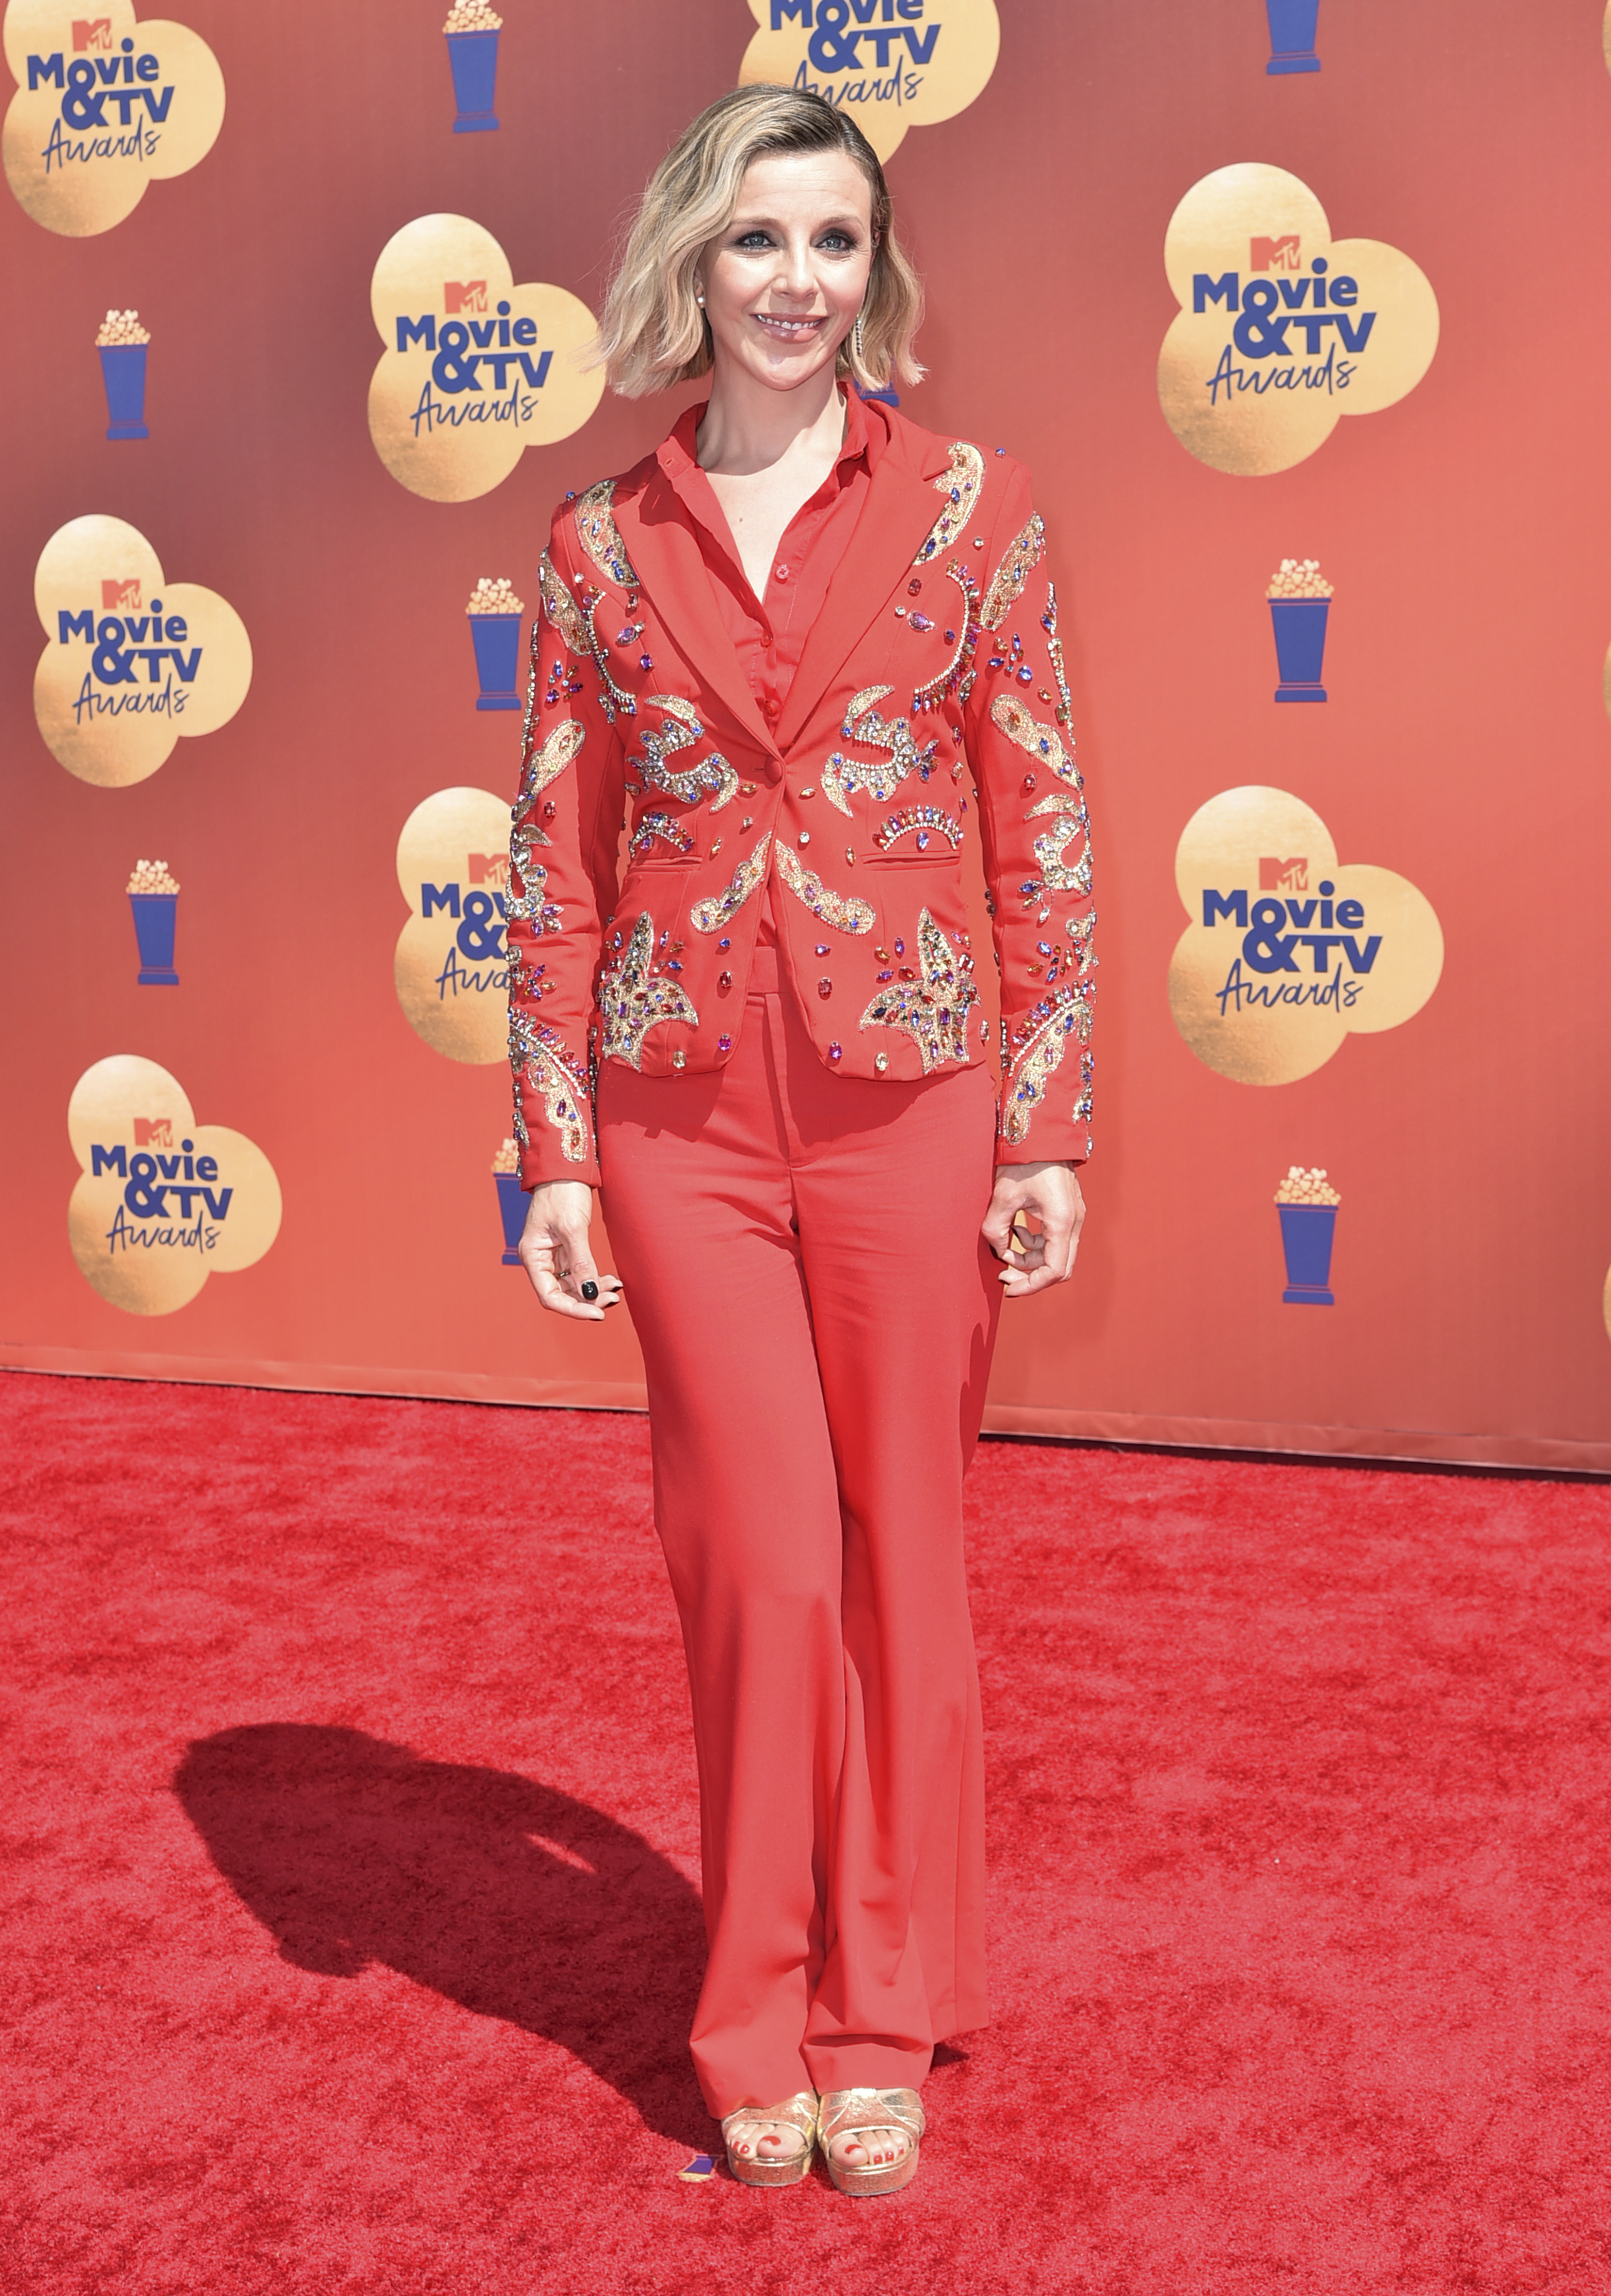 Sophia poses on the red carpet in a red tuxedo. 